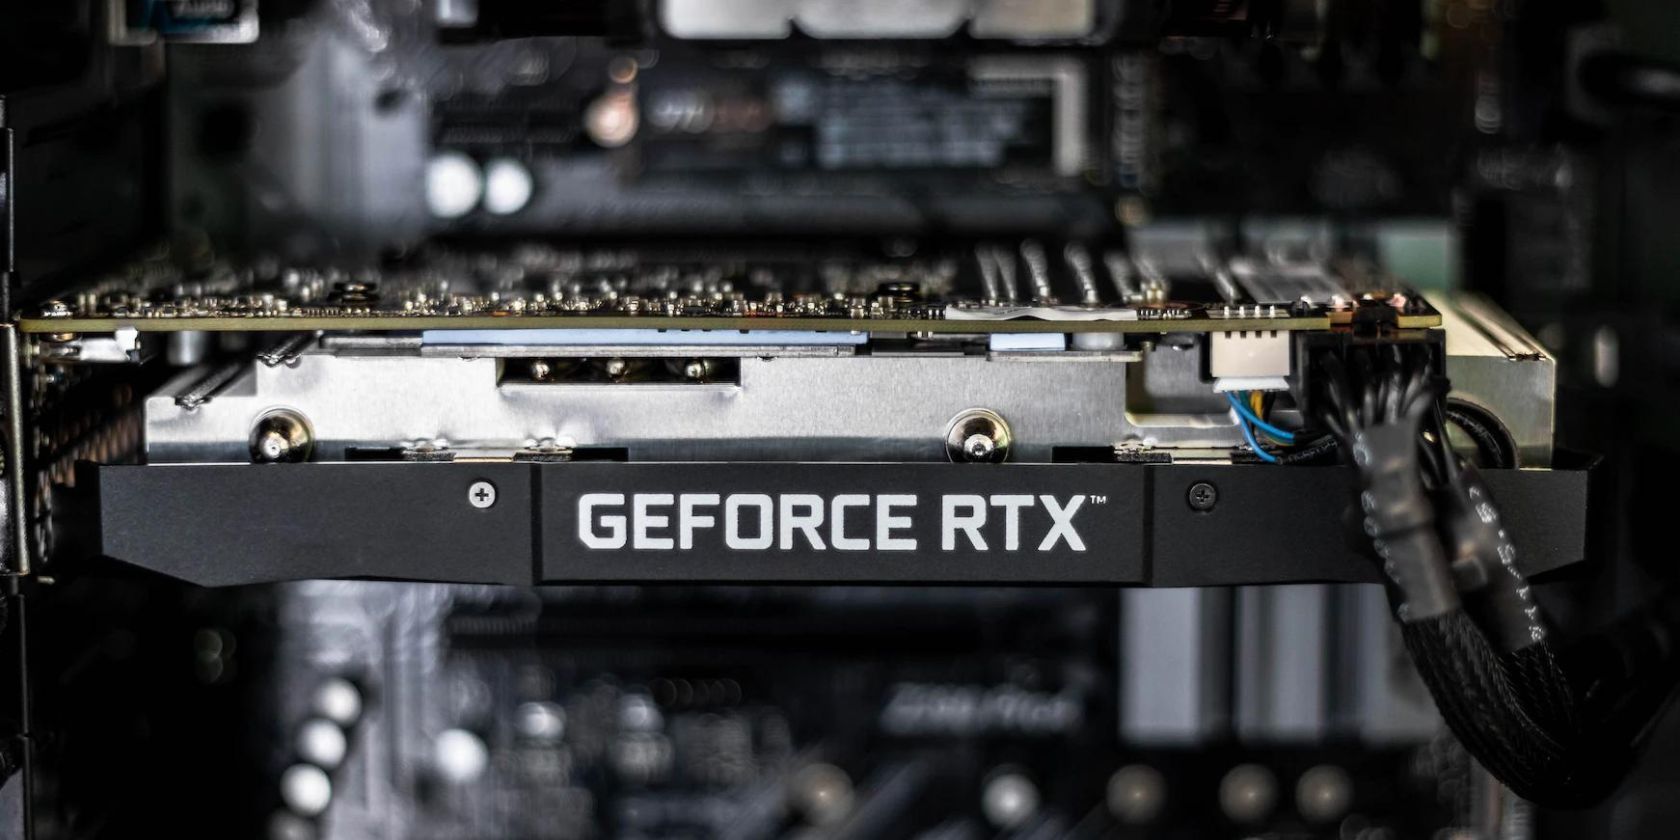 GeForce RTX Graphics Card in PC Setup